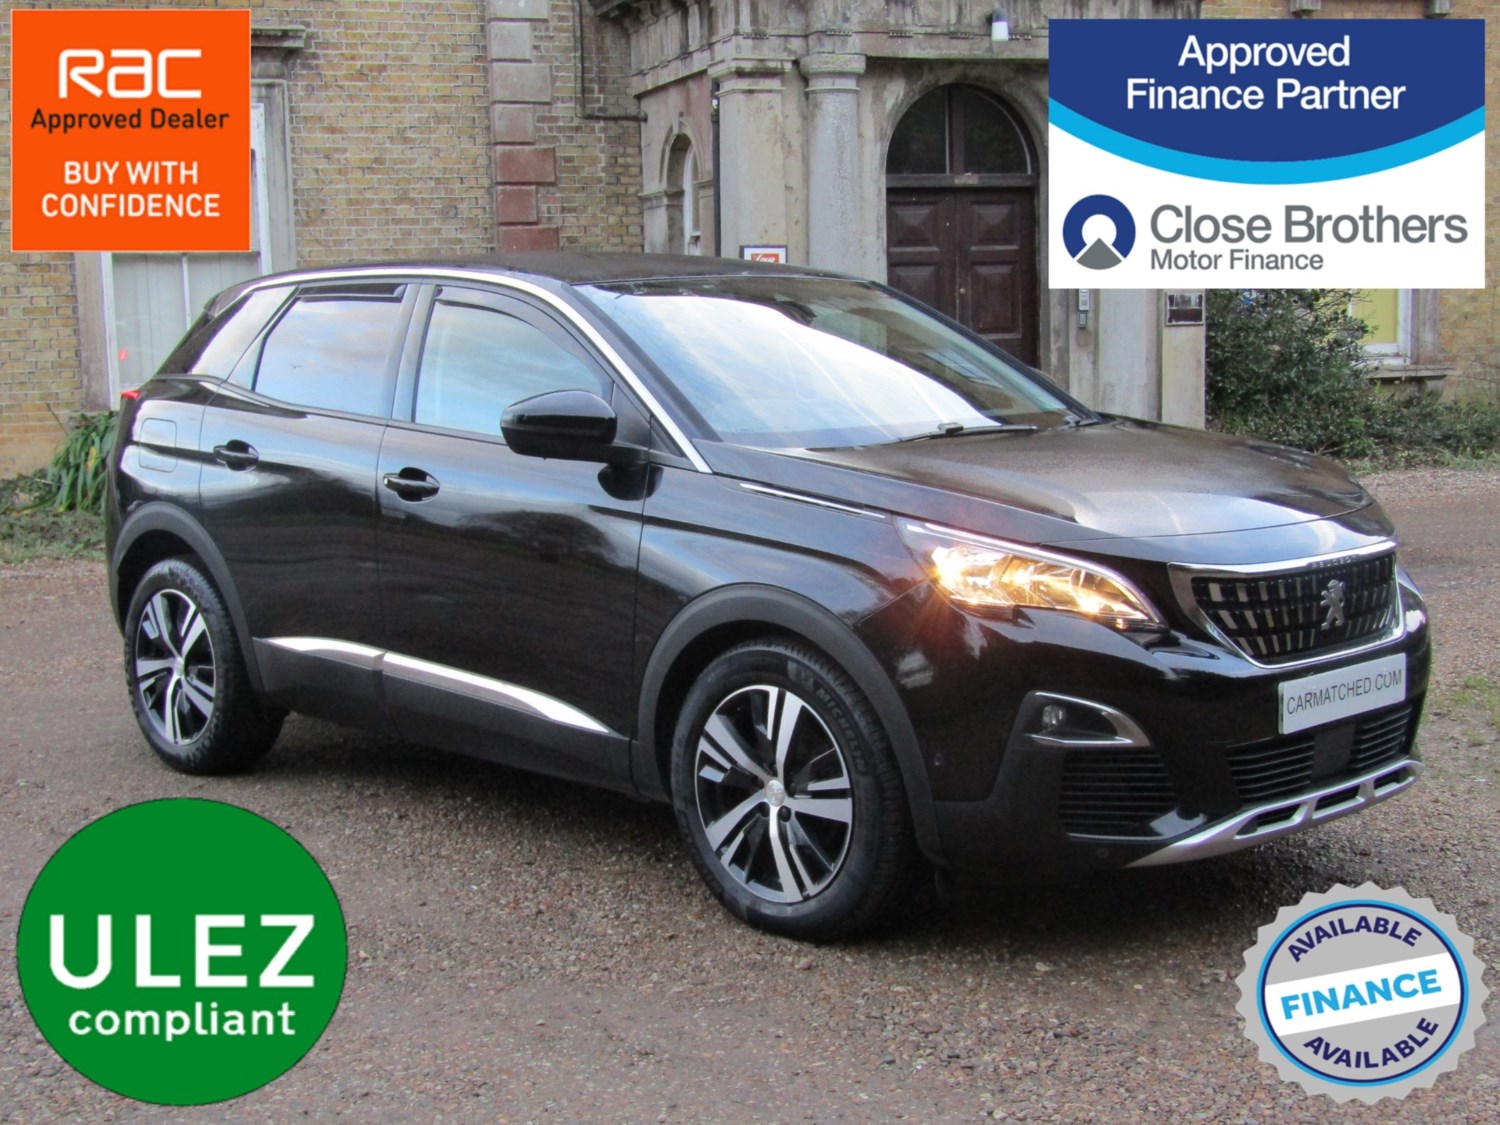 2018 (18) Peugeot 3008 1.6 BlueHDi 120 Allure 5dr For Sale In Broadstairs, Kent